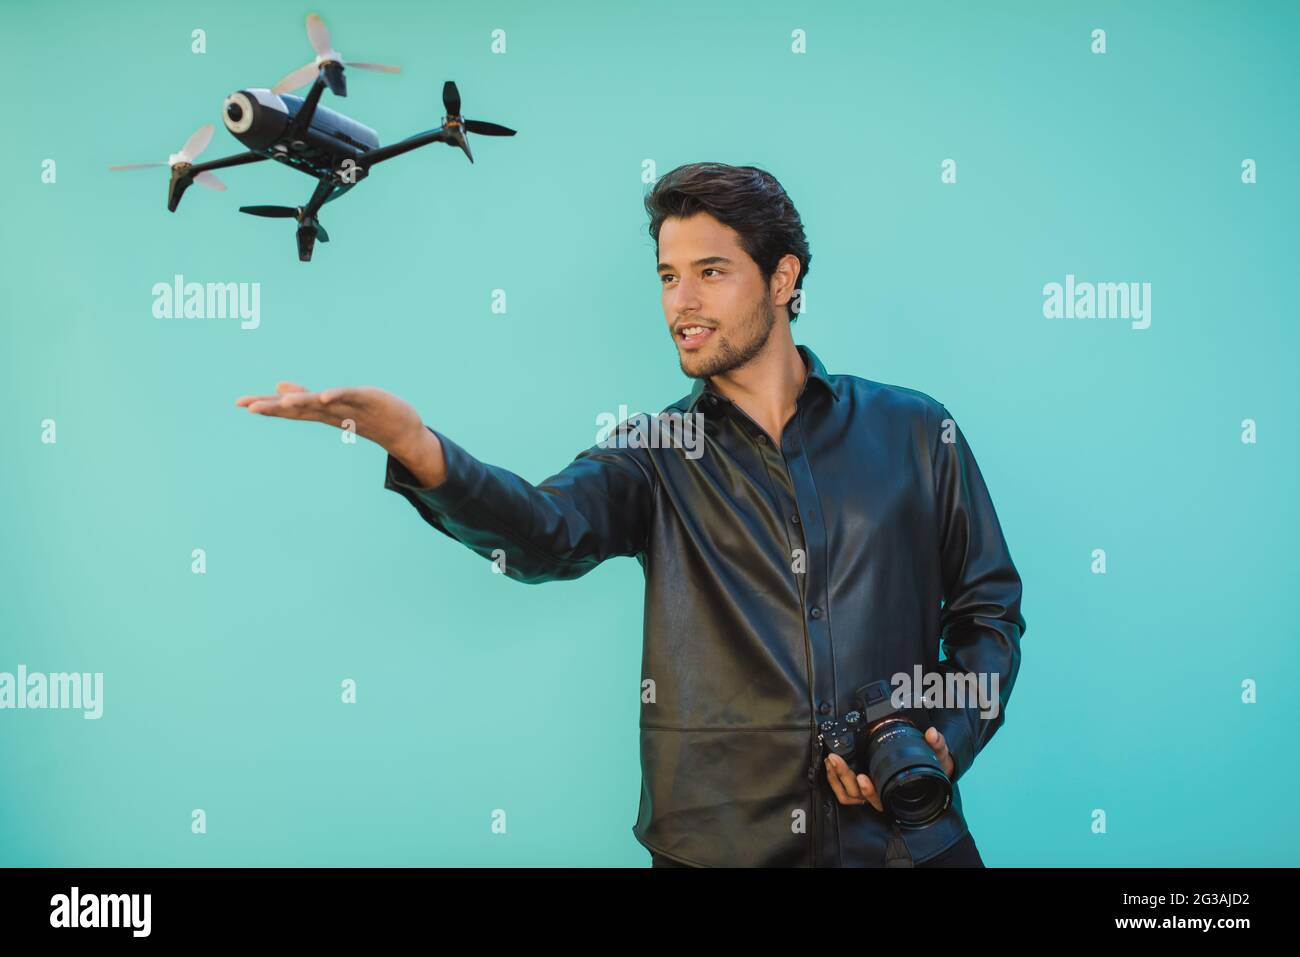 Masculine man with digital photo camera and flying drone Stock Photo